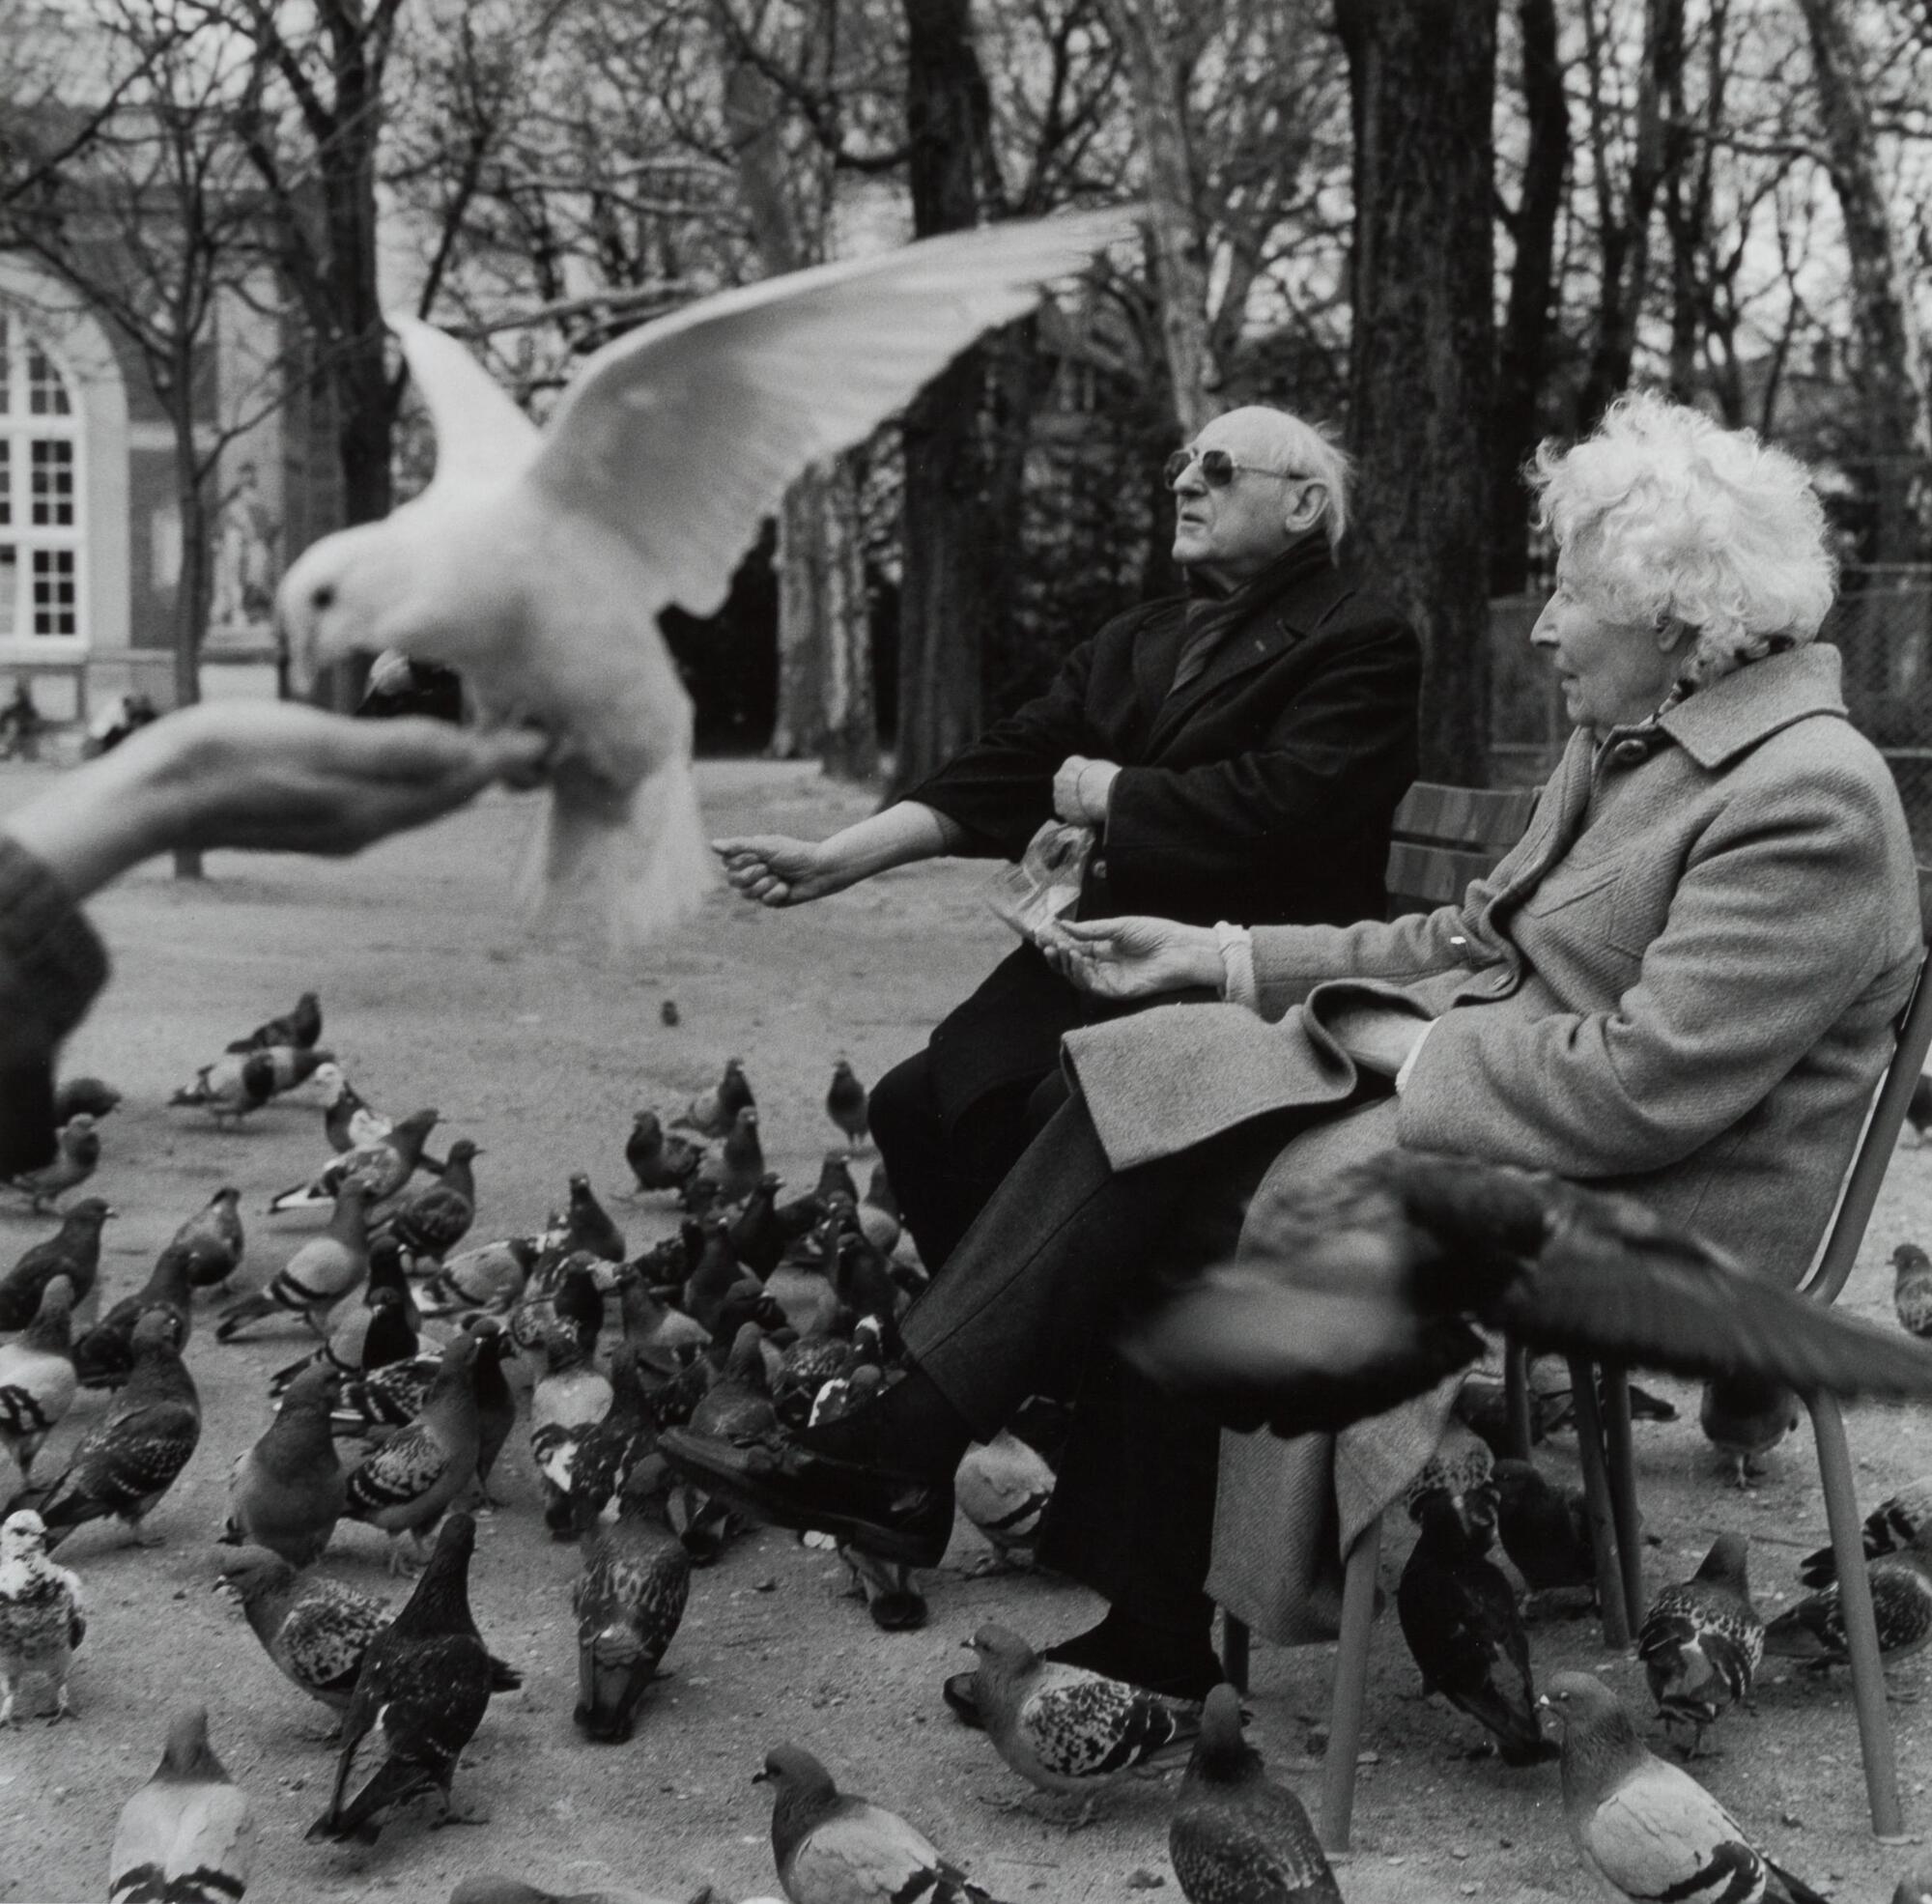 An elderly couple seated on a park bench with pigeons at their feet. There is a close-up of a hand on the left hand side that is feeding a white pigeon, mid-air.